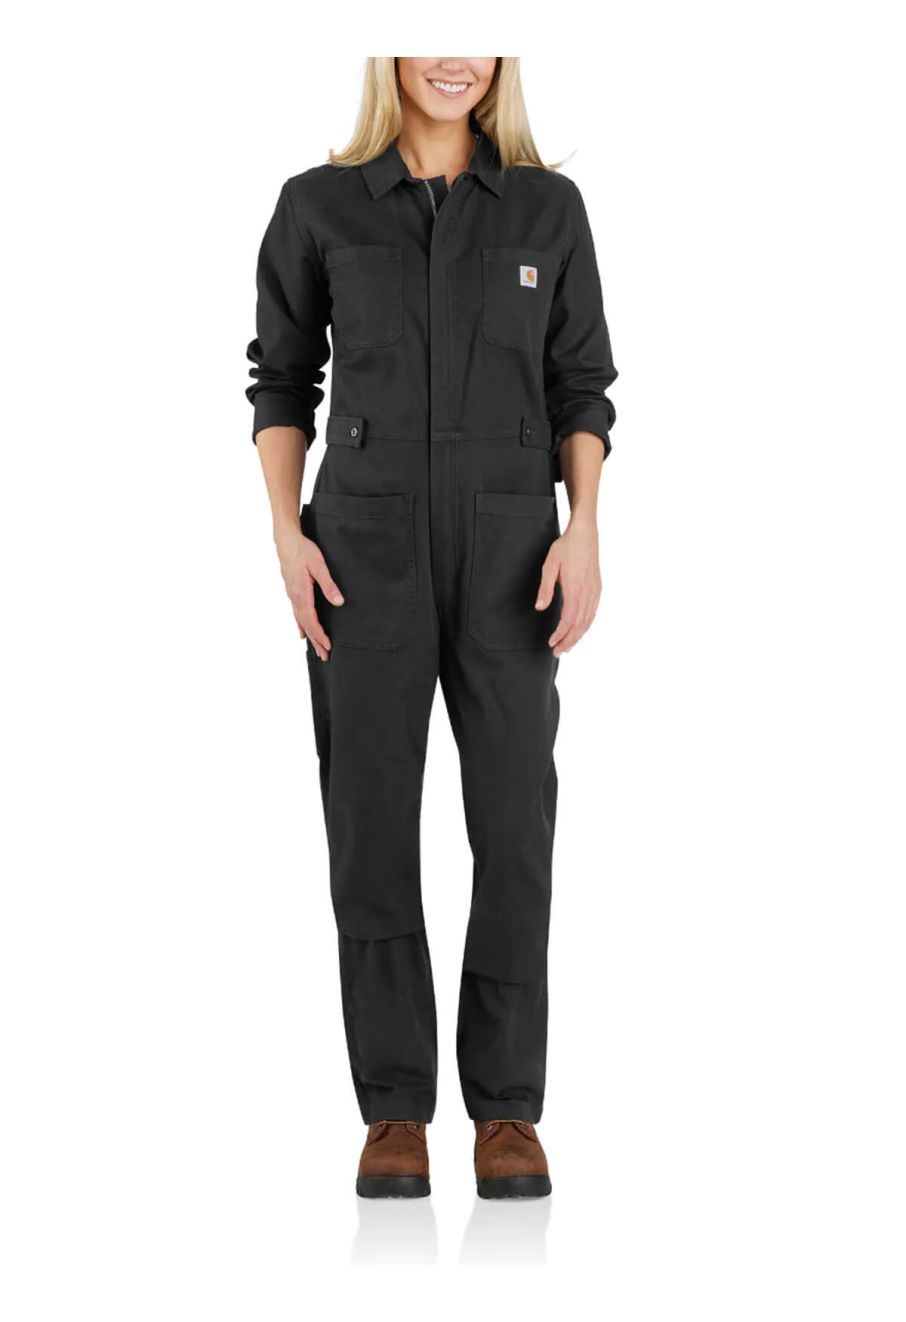 Women's Carhartt WIP Jumpsuits and rompers from $150